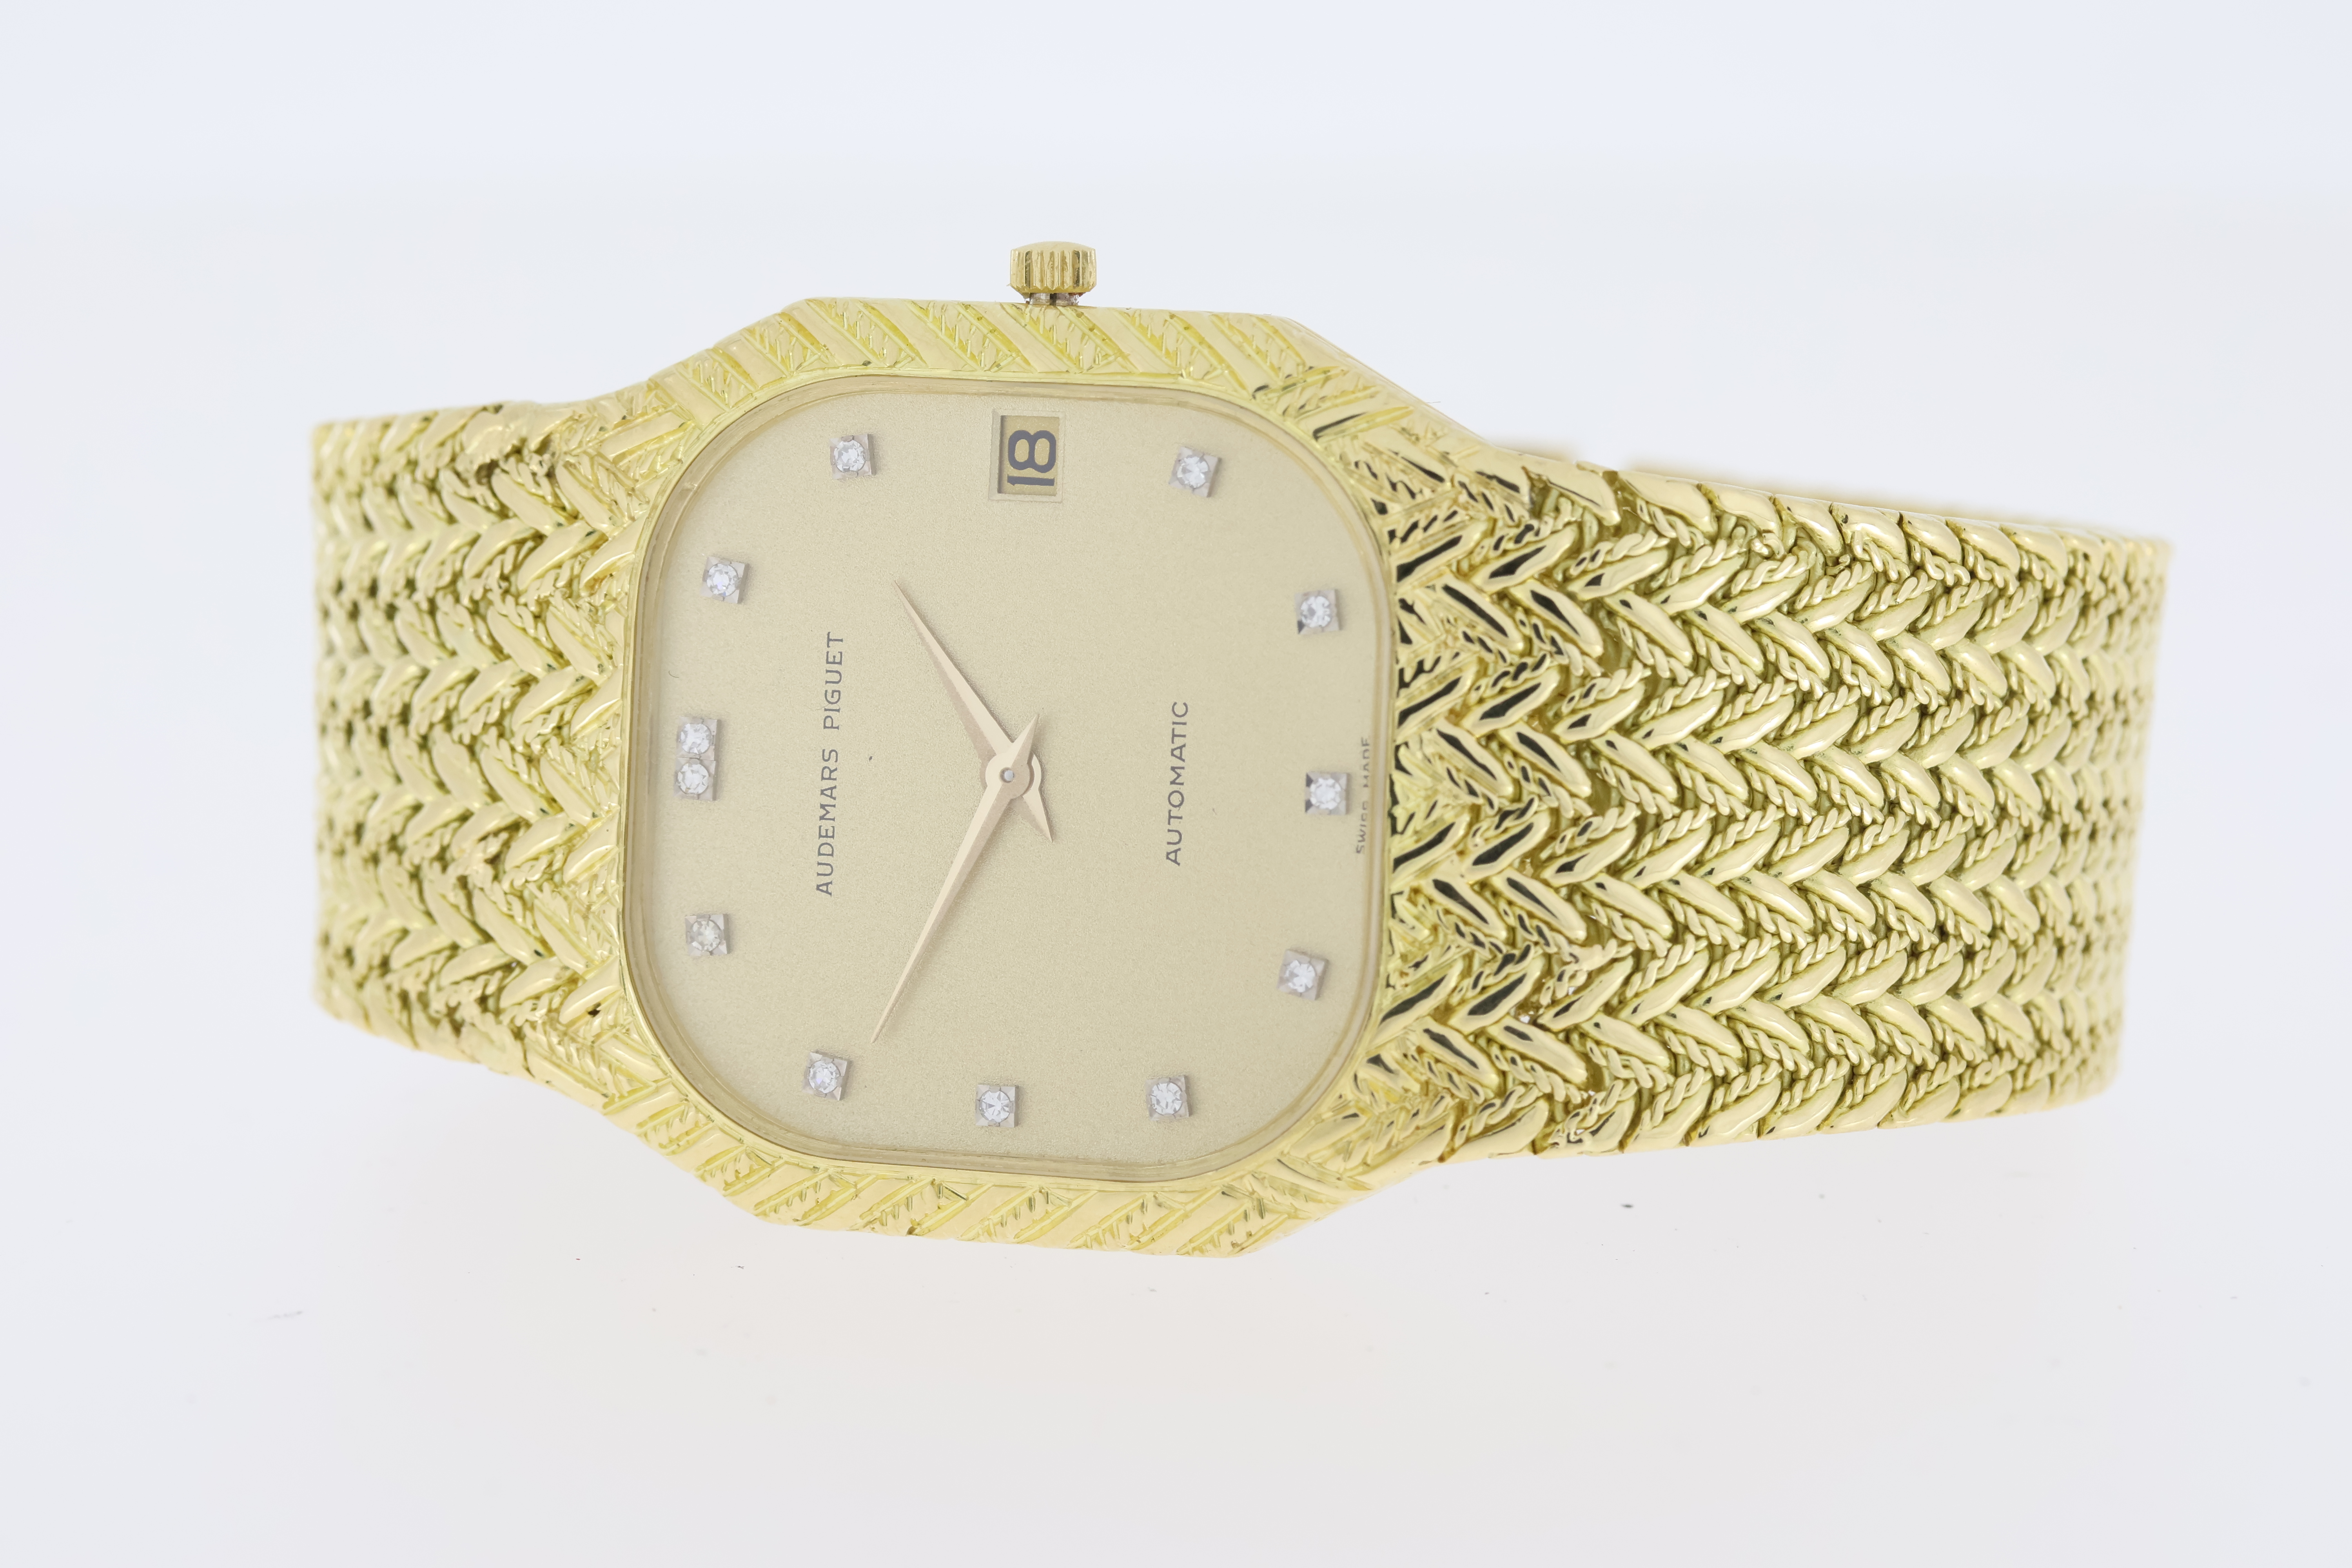 Audemars Piguet 18ct Yellow Gold Automatic - Image 5 of 10